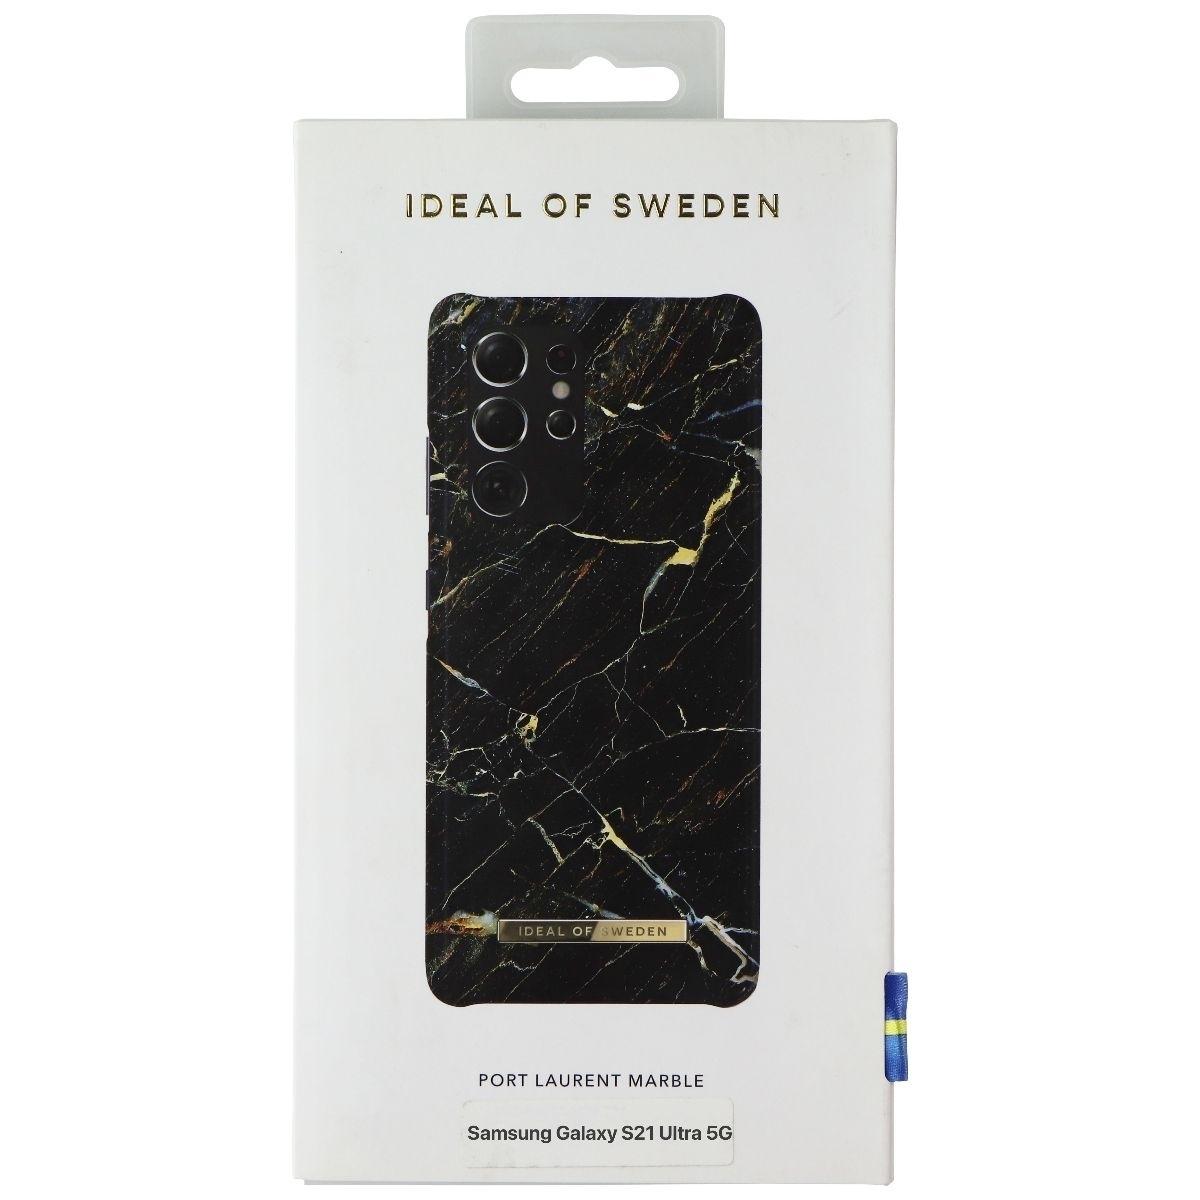 IDeal Of Sweden Printed Case For Samsung Galaxy S21 Ultra 5G - Port Laurent